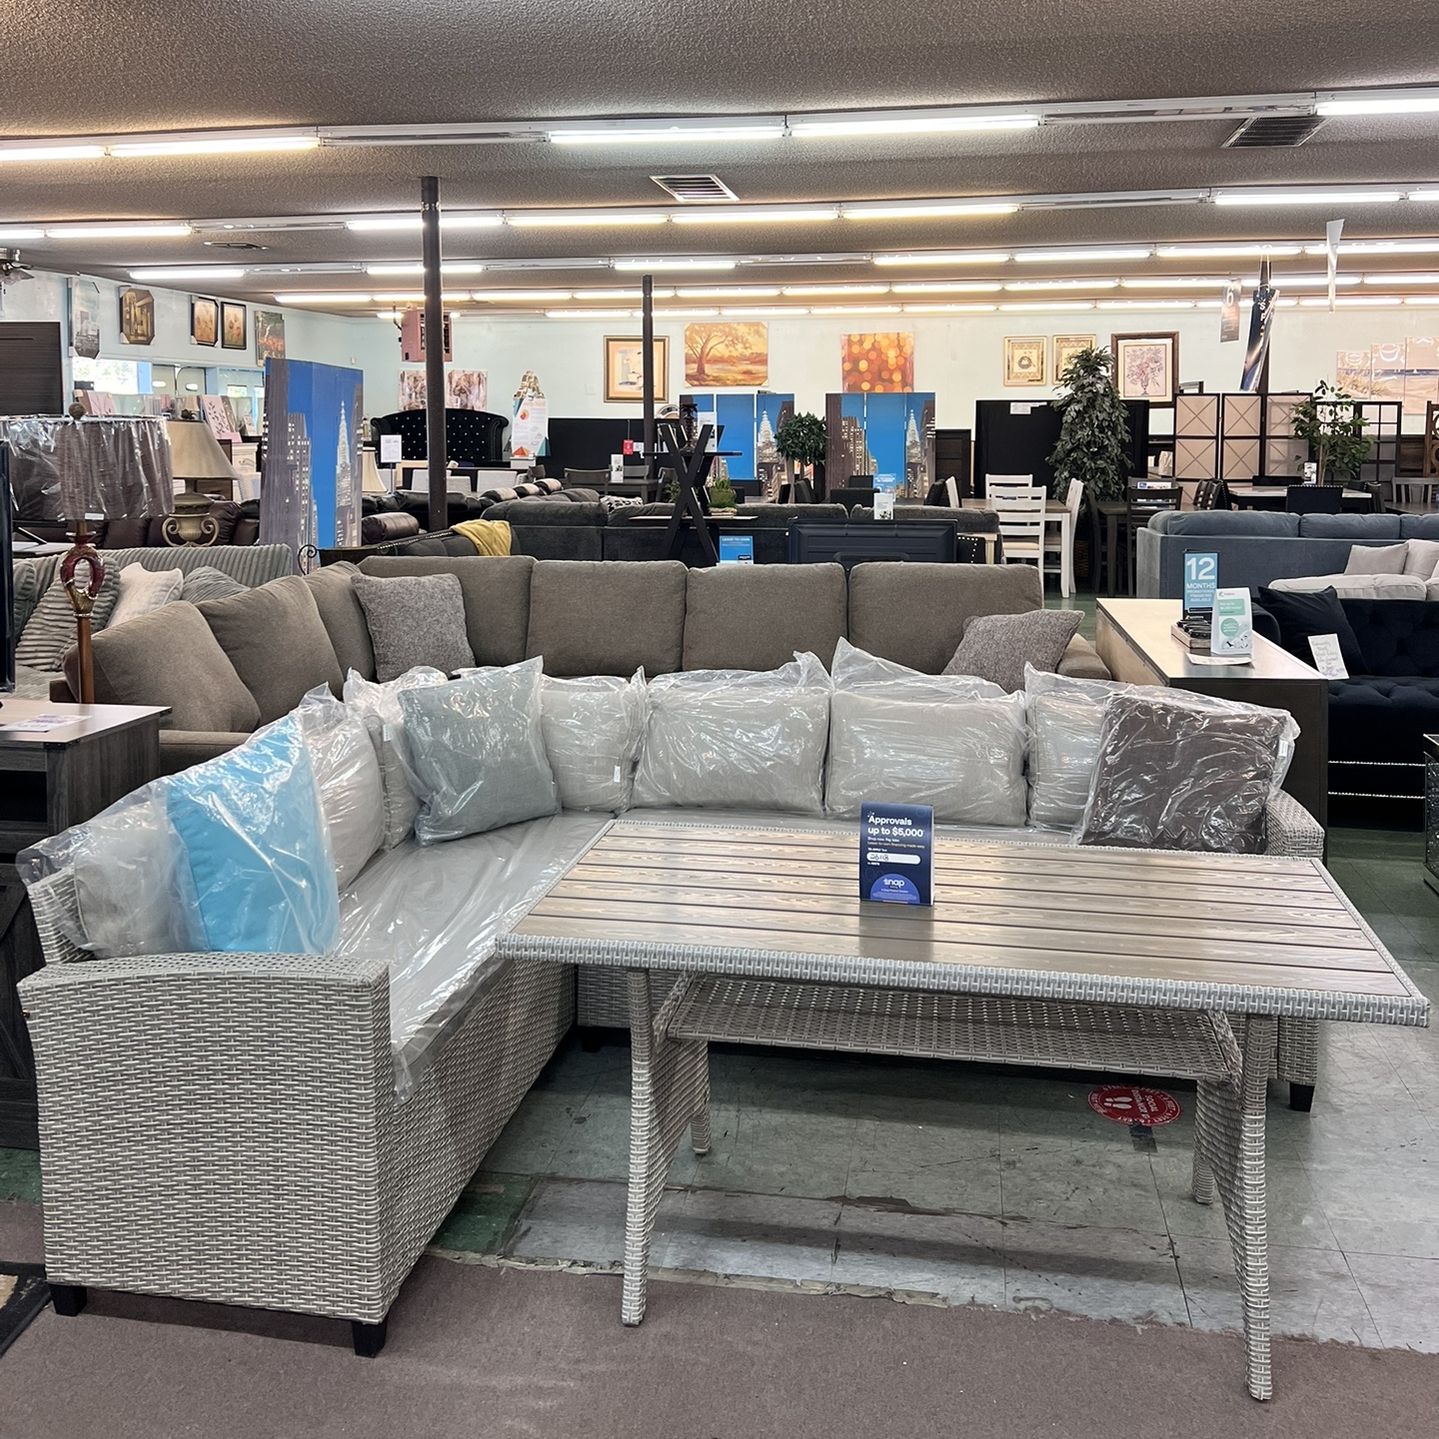 🔥Hot Deal🔥Brand New 3pc Patio Sectional Clearance Speical $655, Delivery Available, Finance Available 